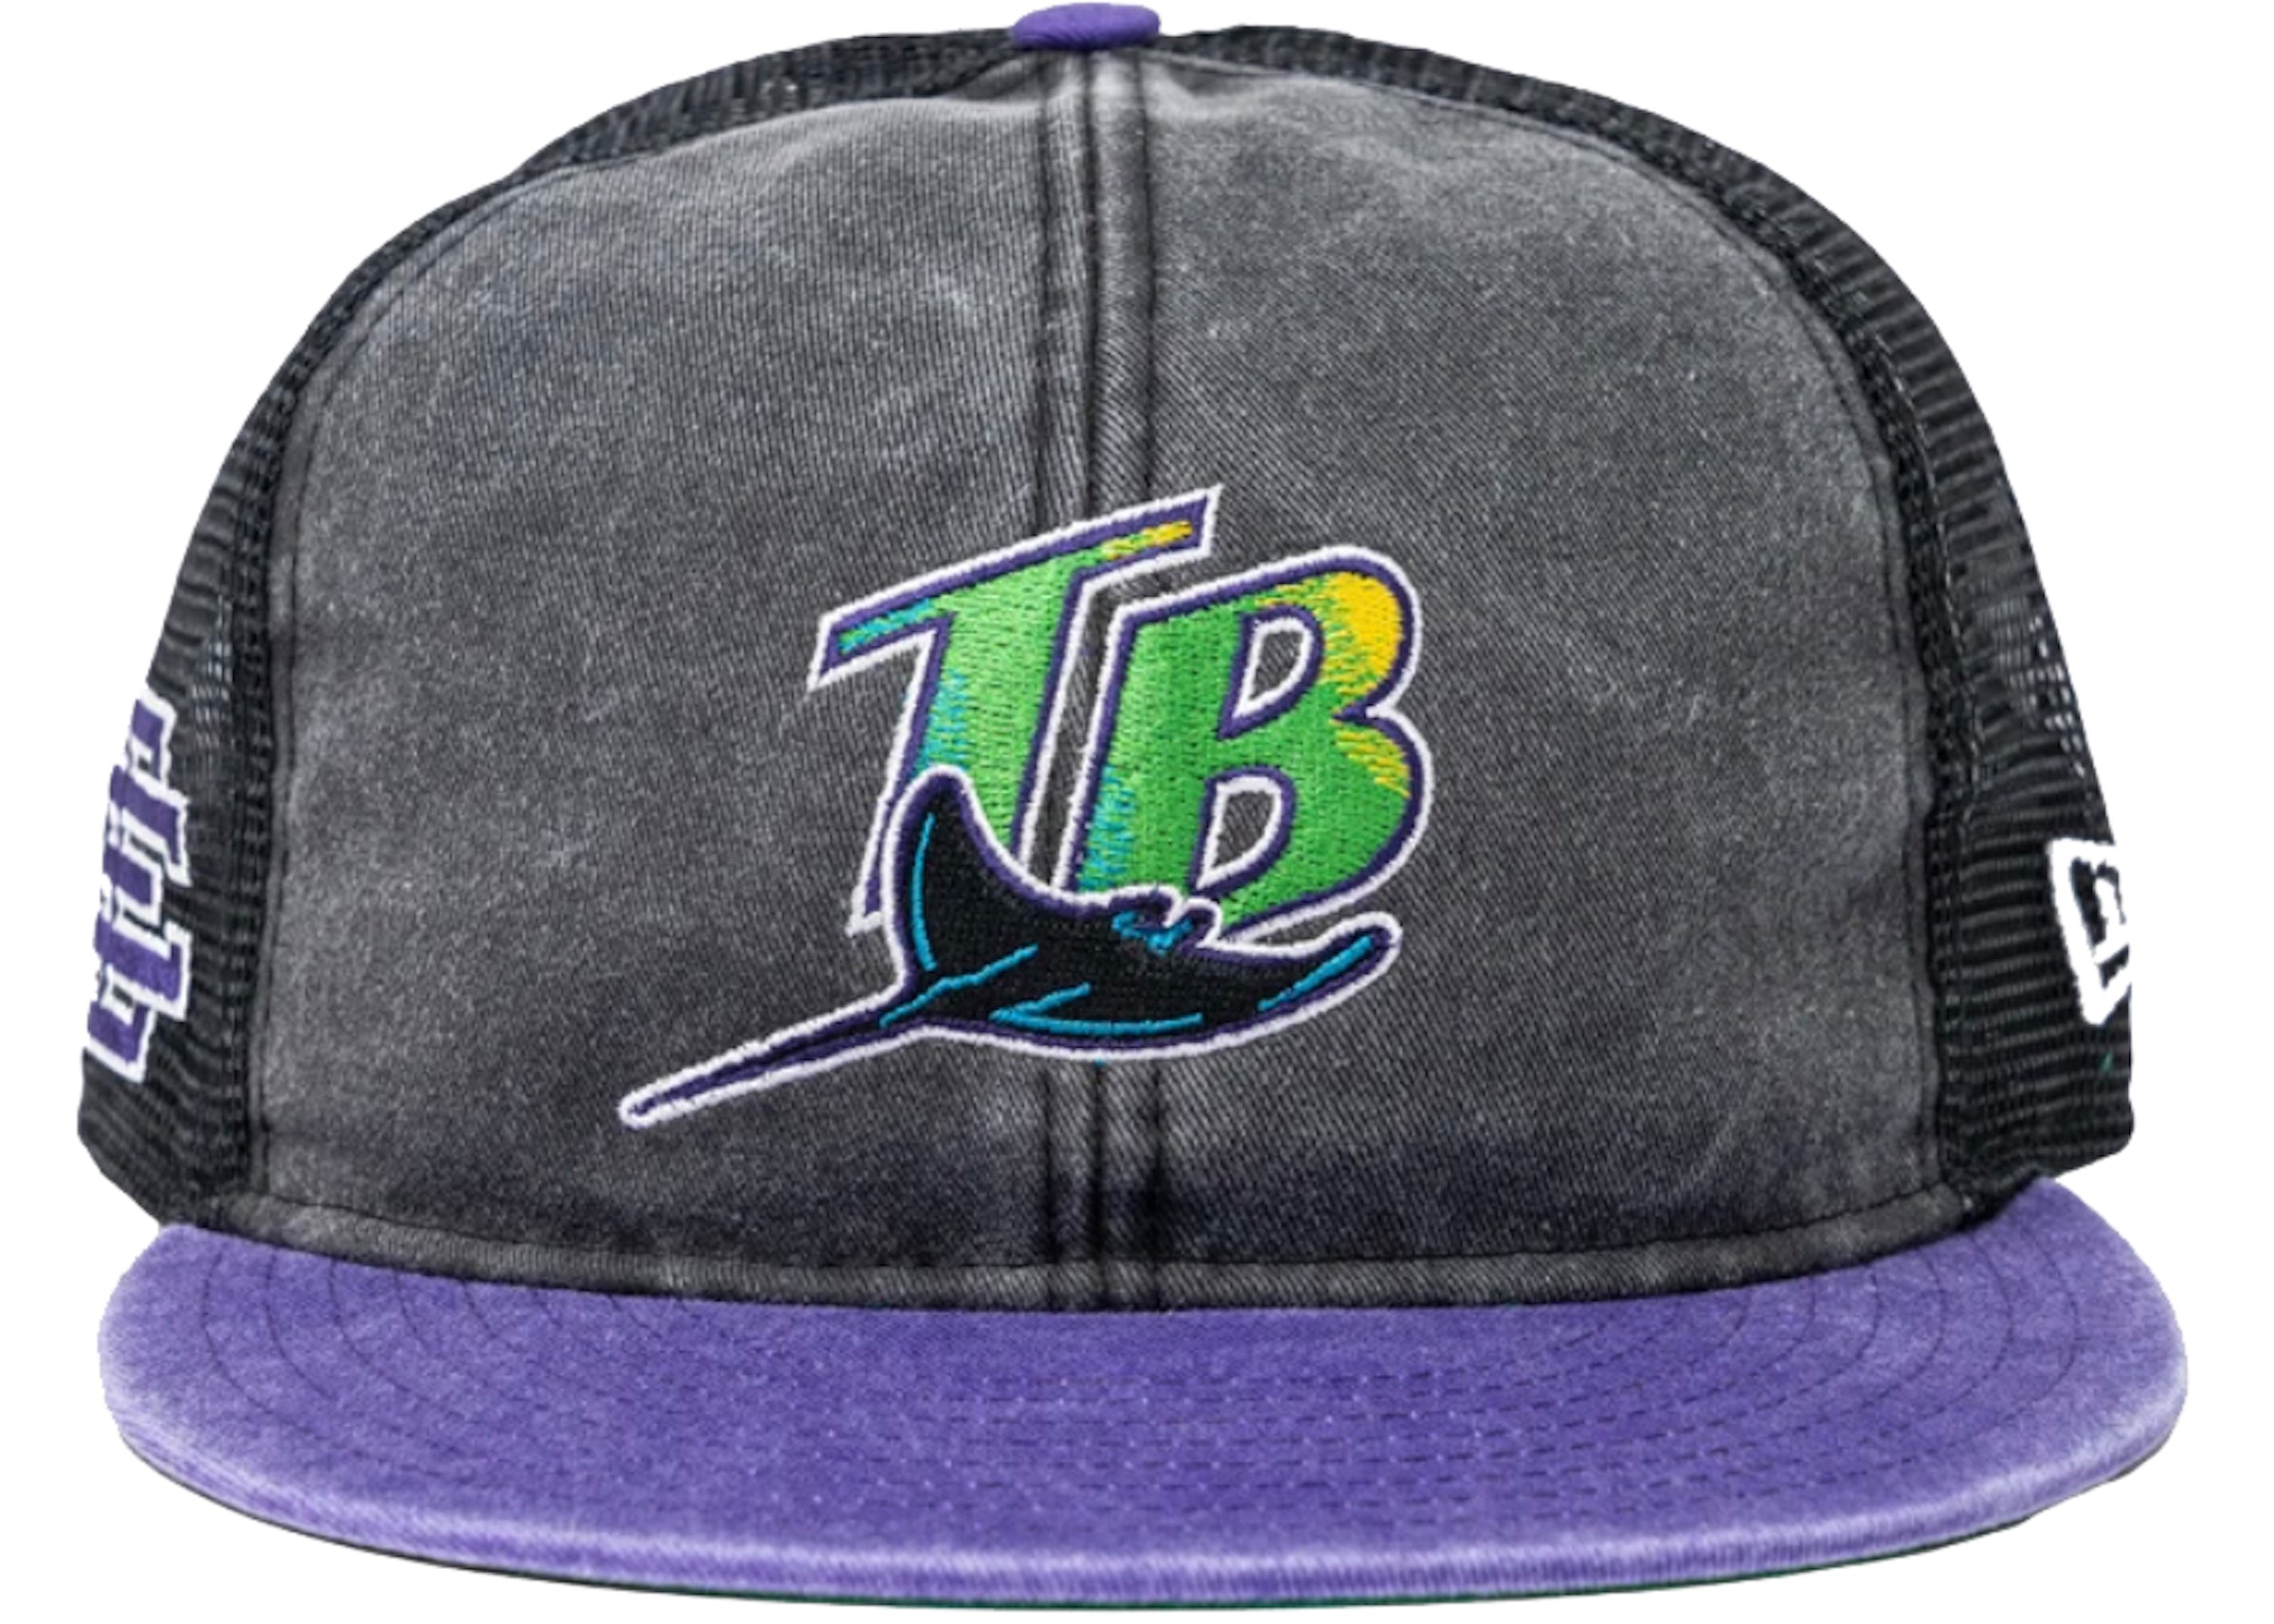 Tampa Bay Devil Rays Hat Baseball Cap Fitted 7 1/2 Green New Era Vintage  Retro